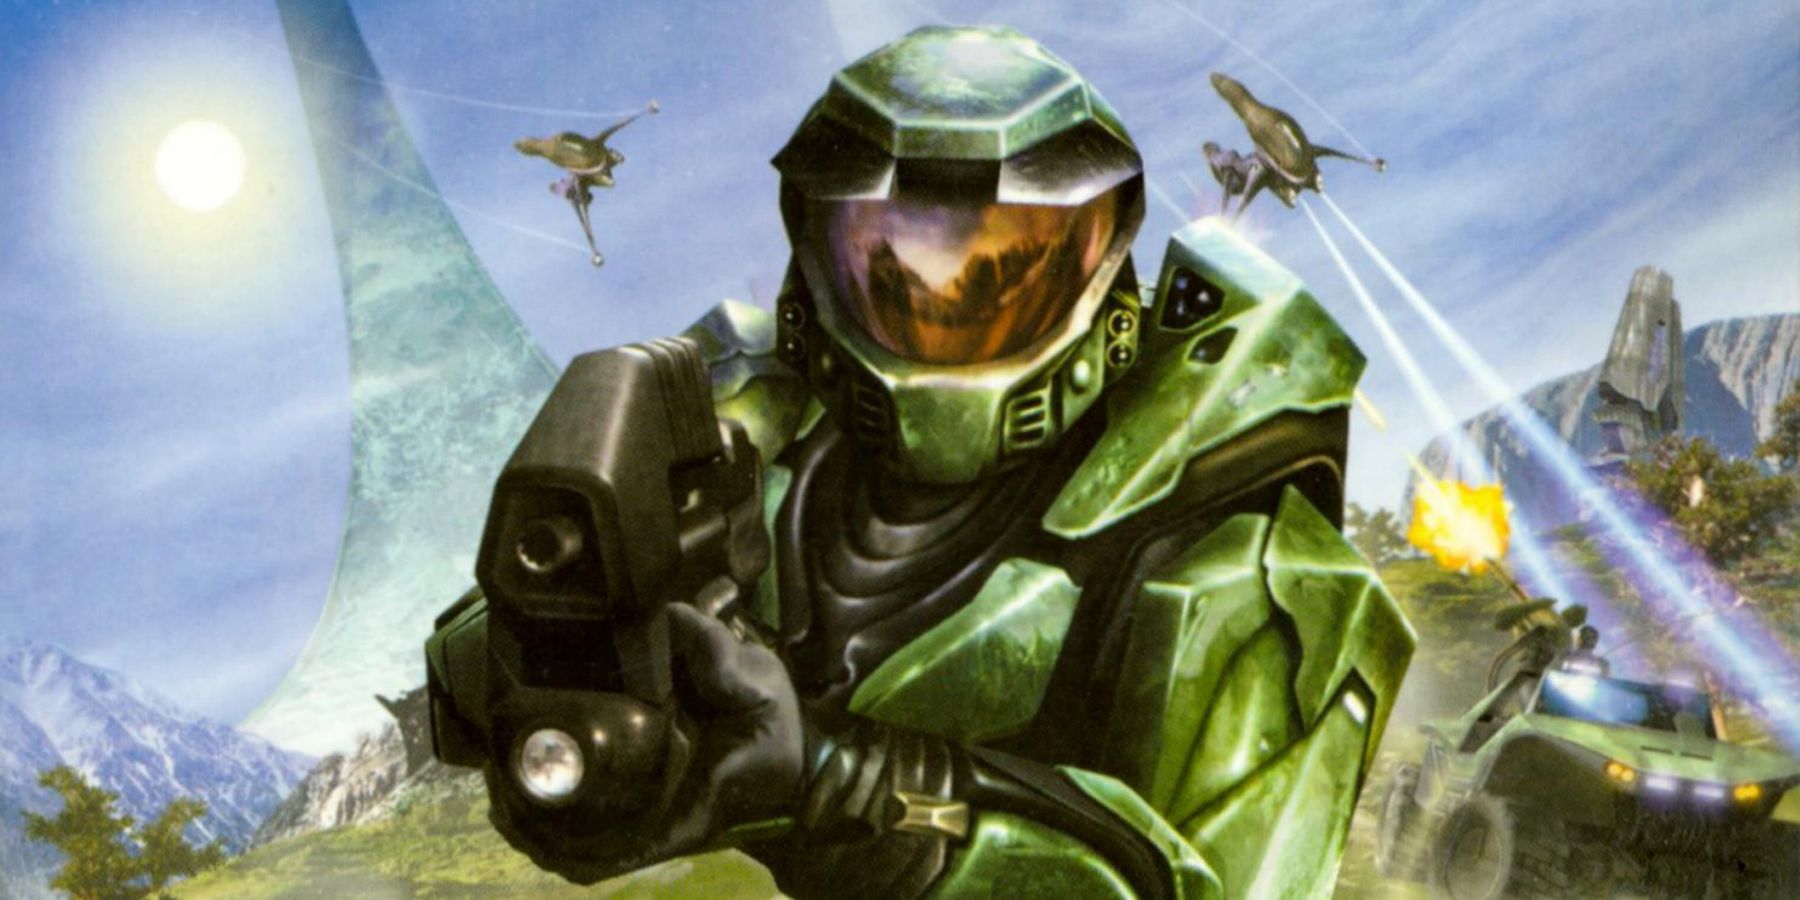 Halo Combat Evolved cover art cropped